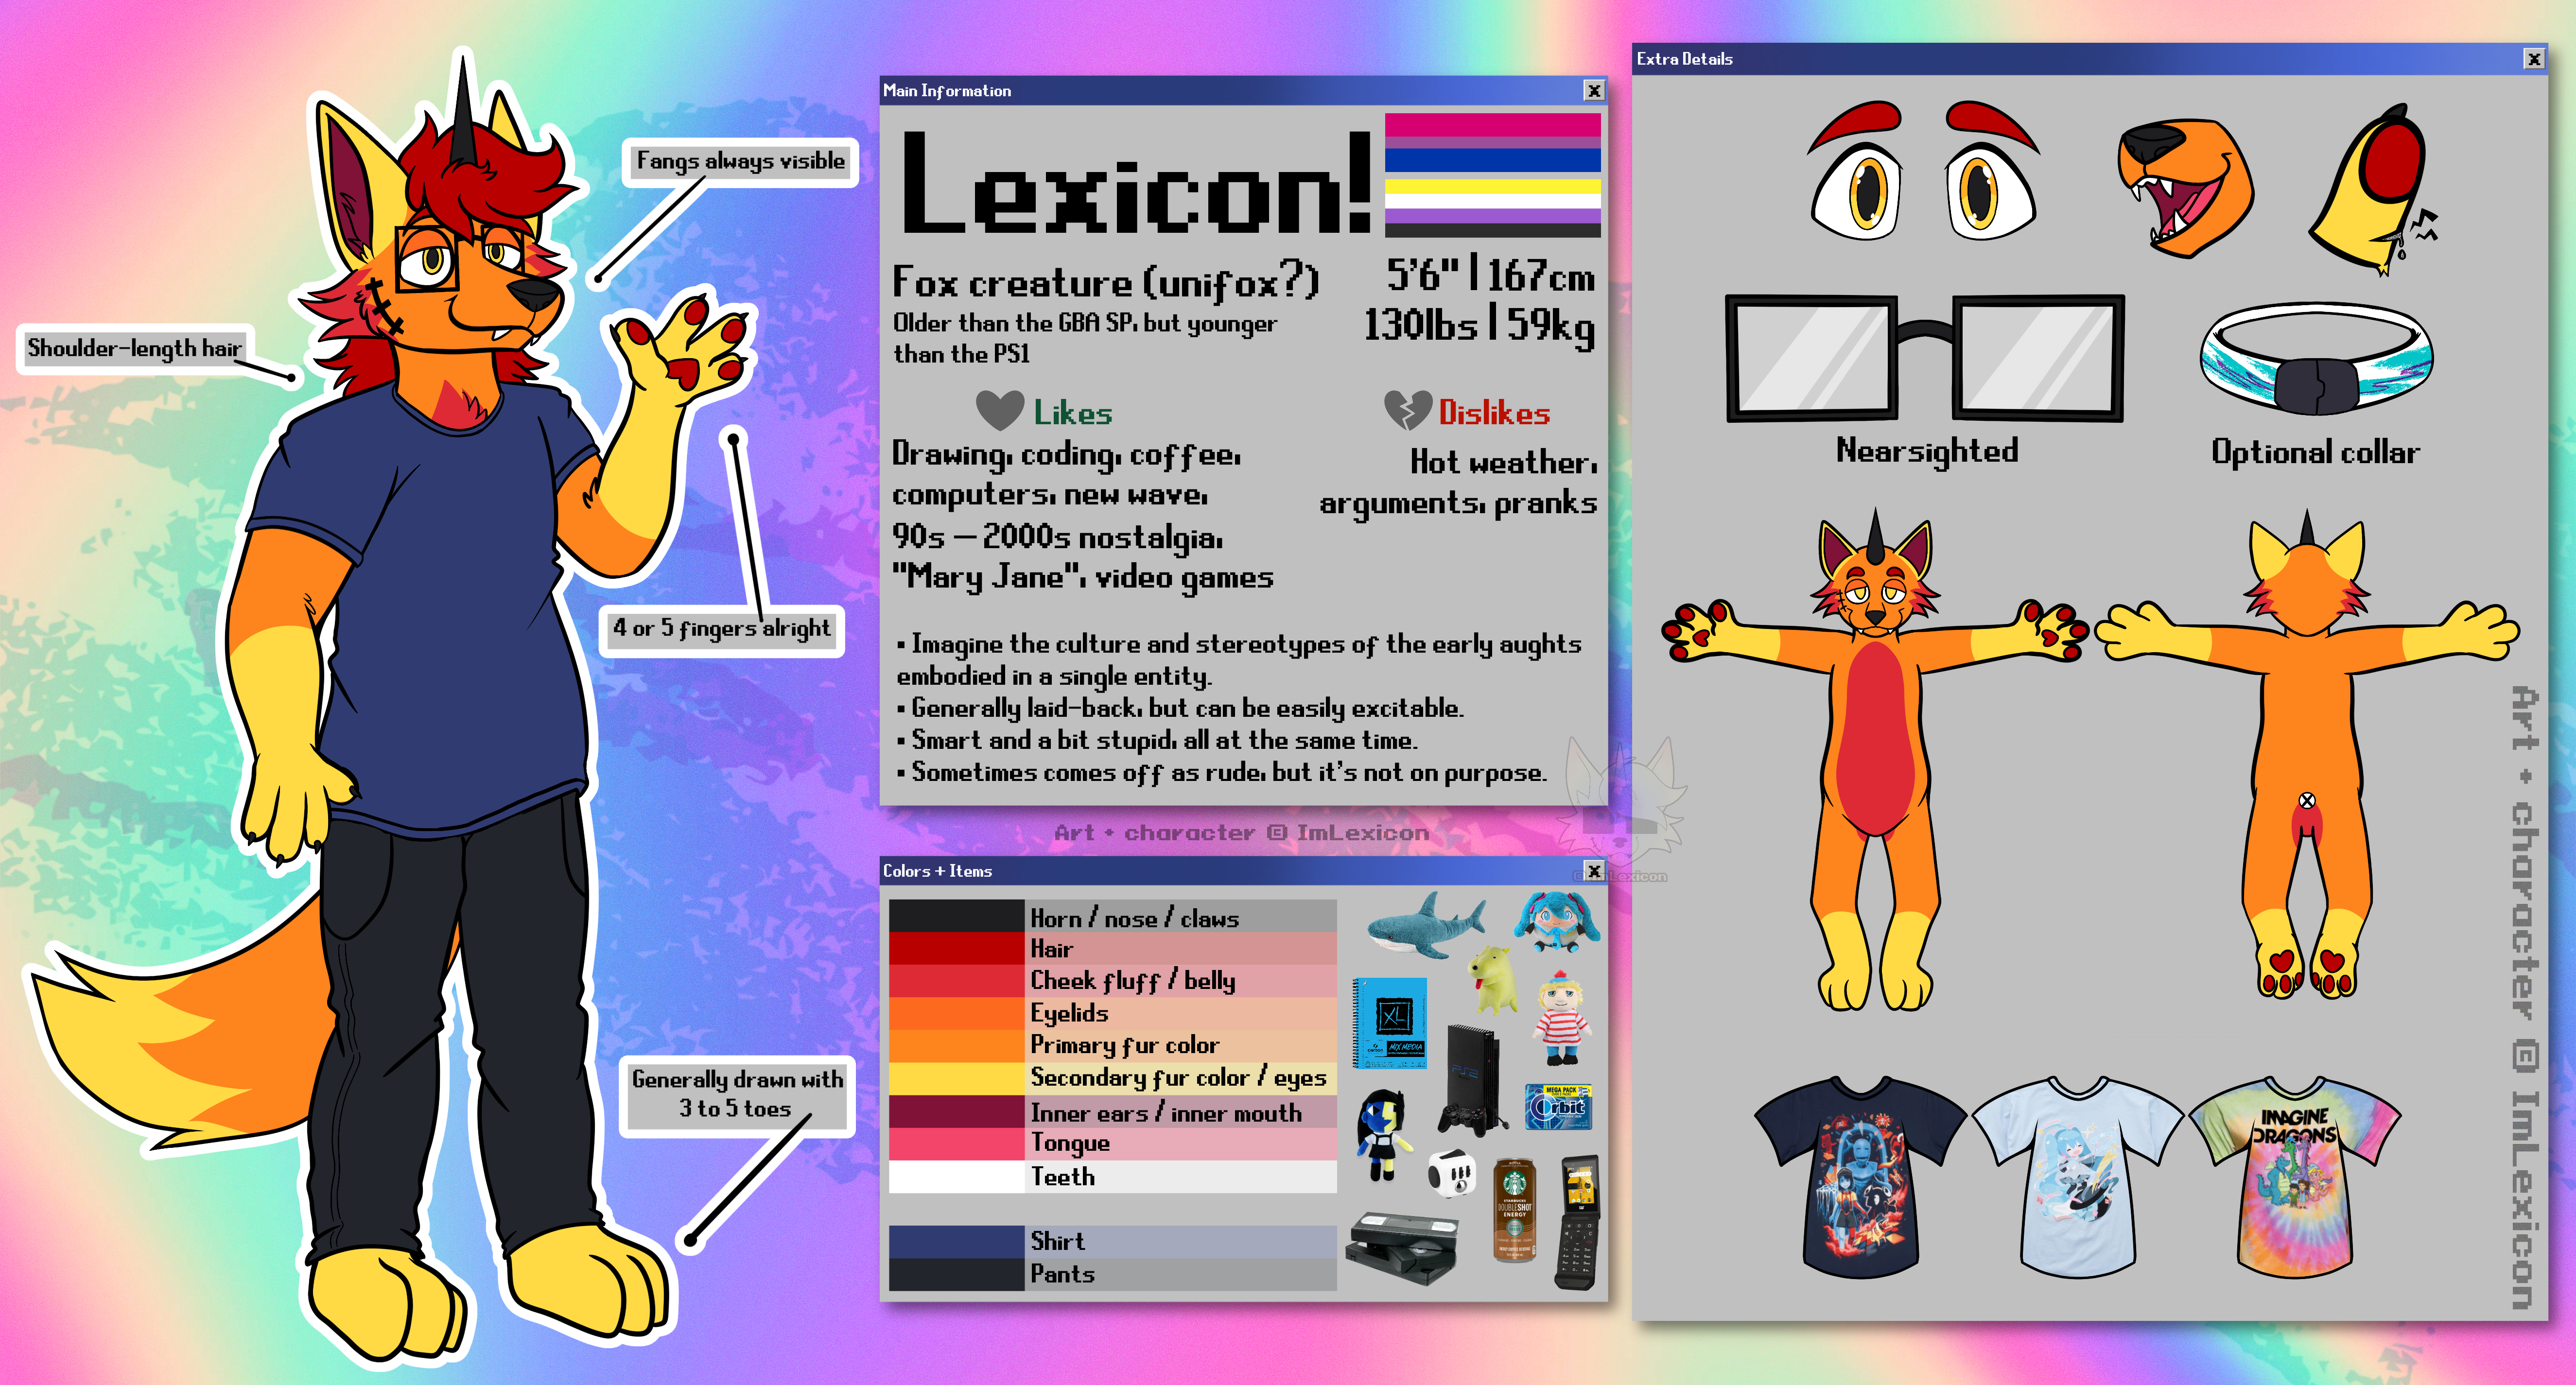 A reference sheet for Lexicon, an orange anthro unicorn fox with fangs, shoulder-length red hair and stitching on their right cheek. They wear eyeglasses, a blue t-shirt, and dark gray jeans. They can have 4 or 5 fingers, and 3 to 5 toes.

            The background is a rainbow gradient with the Solo jazz pattern over it. The sheet is formatted like Windows pop-up boxes.

            Box 1: Main Information
            Lexicon! Bisexual + non-binary.
            Fox creature (unifox?)
            Older than the GBA SP, but younger than the PS1.
            5'6 | 152cm
            130lbs | 59kg
            Likes: Drawing, coding, coffee, computers, new wave, 90s – 2000s nostalgia, Mary Jane', video games.
            Dislikes: Hot weather, arguments, pranks.
            Description: Imagine the culture and stereotypes of the early aughts in a single entity. Generally laid-back, but can be easily excitable.  Smart and a bit stupid, all at the same time. Sometimes comes off as rude, but it's not on purpose.

            Box 2: Colors + Items
            Consists of their color palette and a variety of items, such as a PlayStation 2, a stack of VHS tapes, an array of plushies, and a Starbucks Doubleshot drink.

            Box 3: Extra Details
            Consists of a closeup of their eyes and mouth, as well as a cut finger with static blood.
            There is a pair of rectangular eyeglasses and a collar with the Solo jazz cup pattern, with 